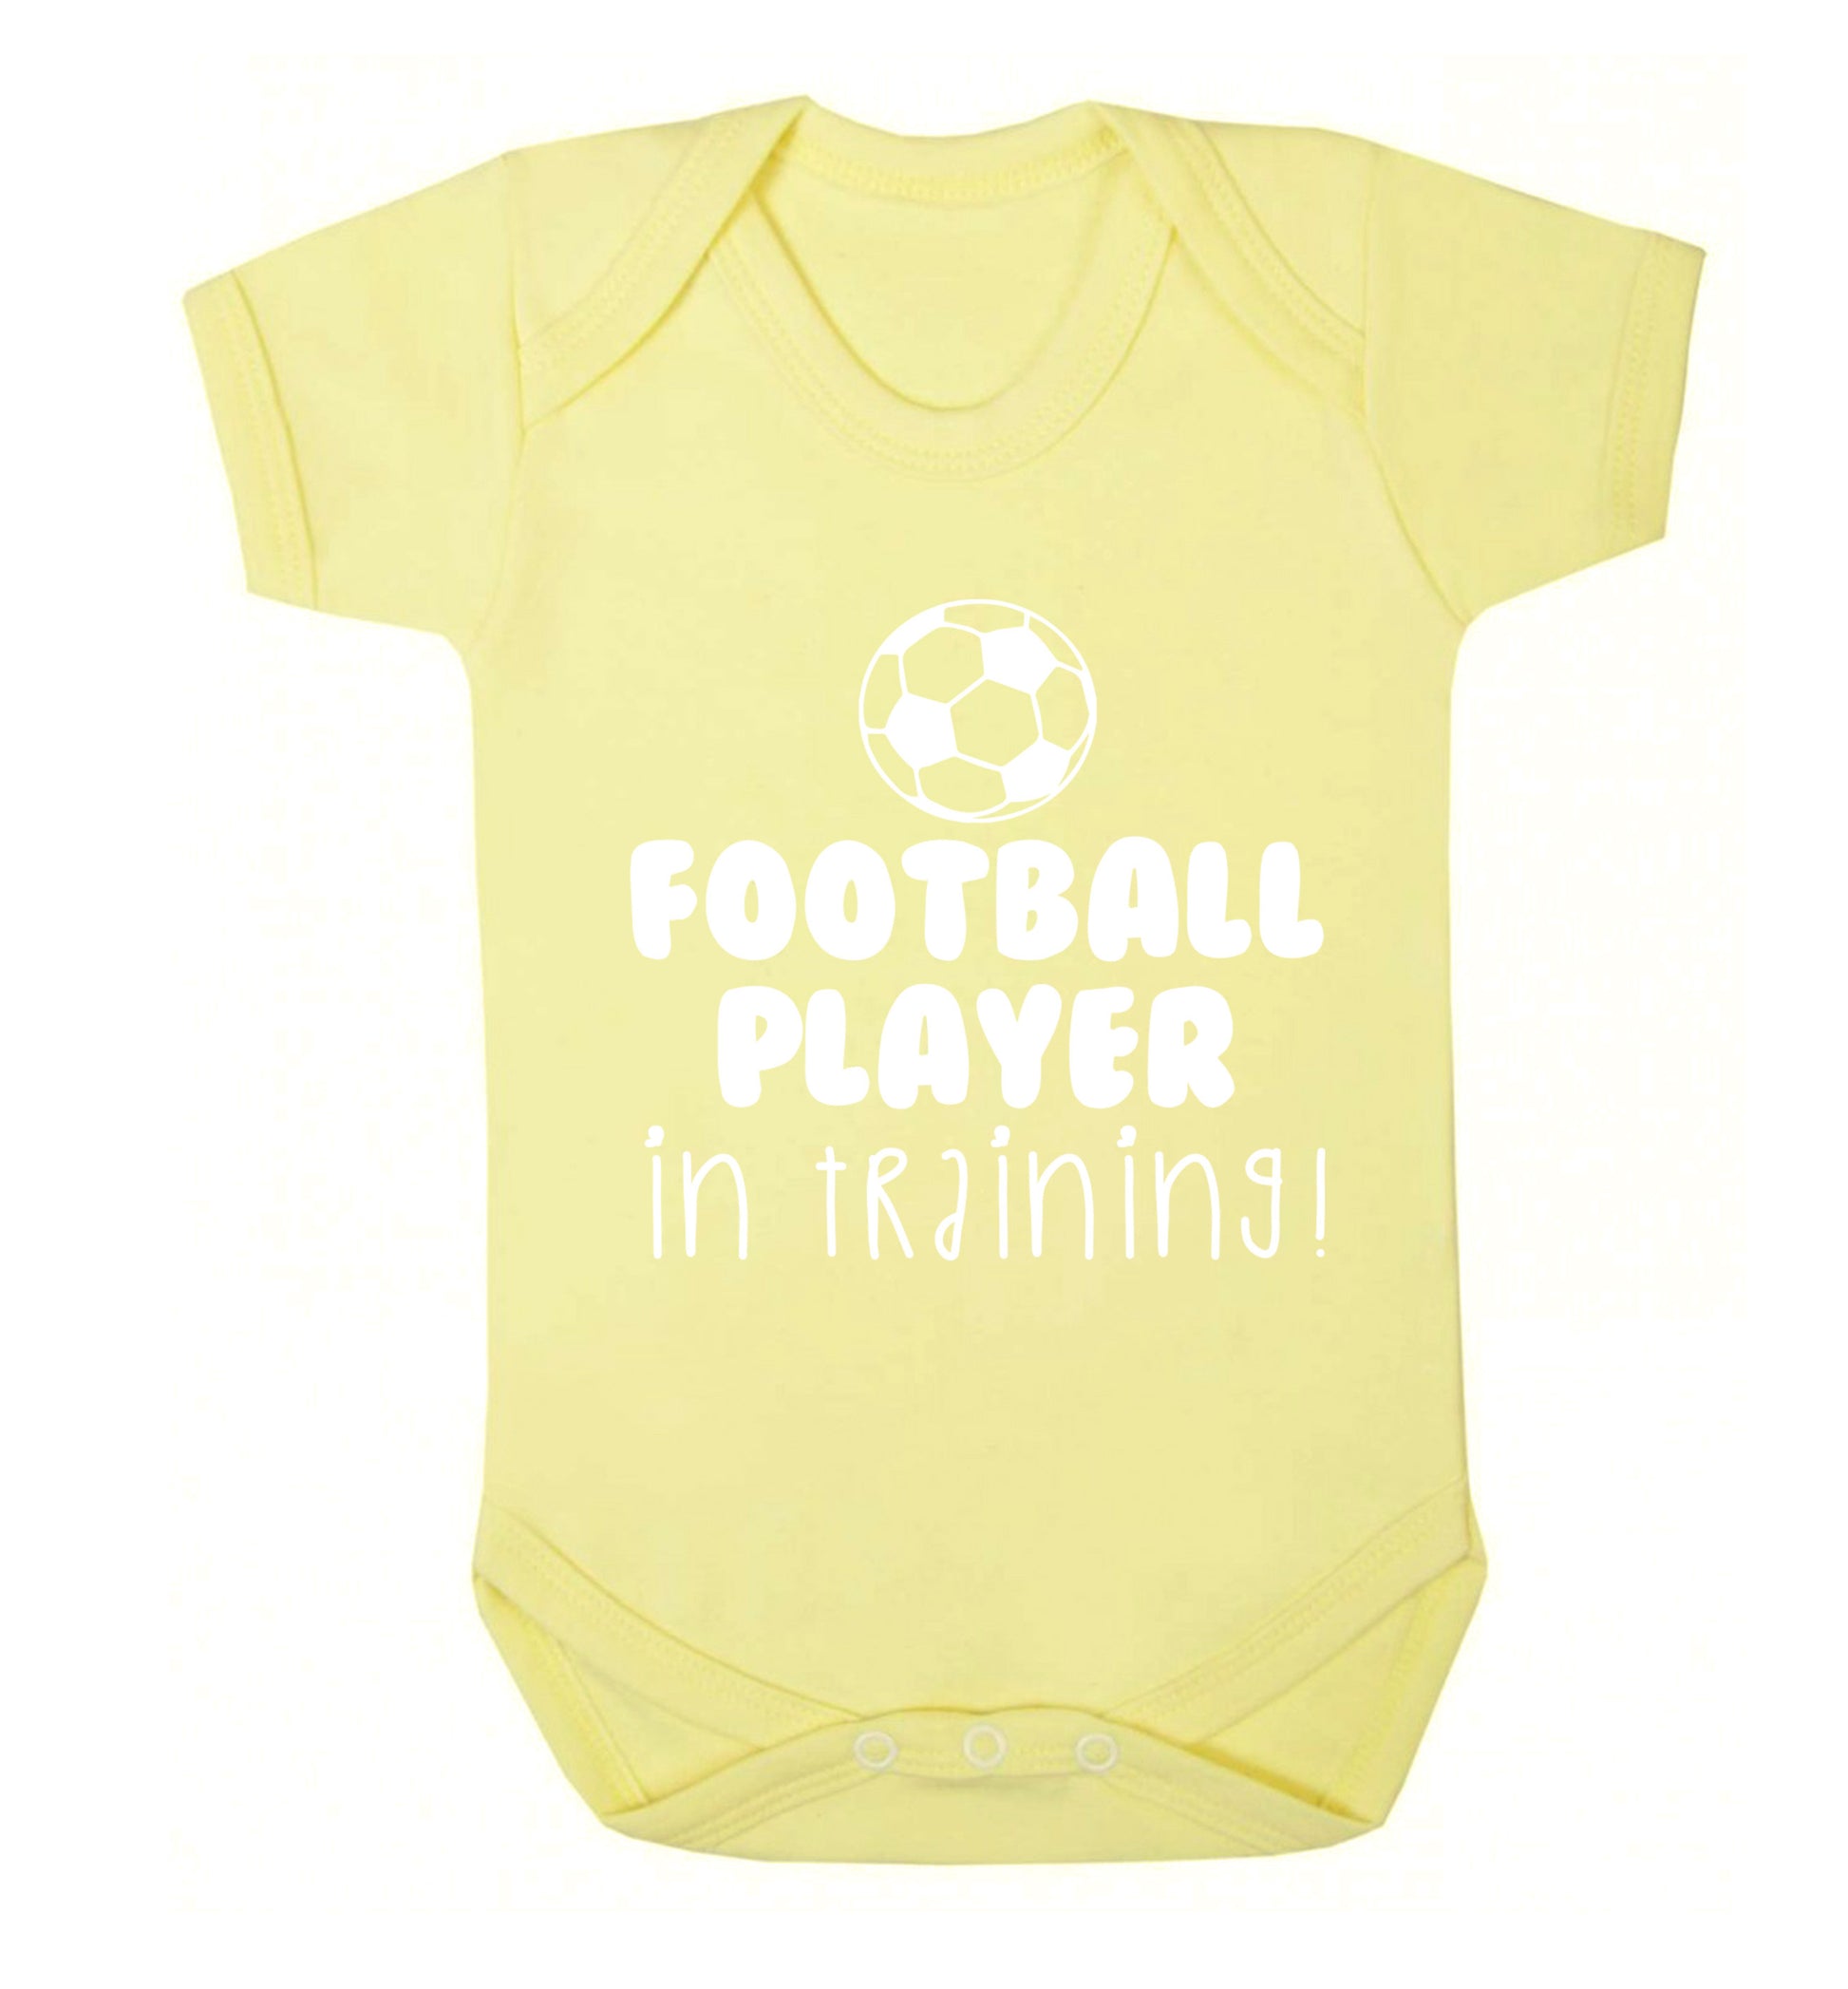 Football player in training Baby Vest pale yellow 18-24 months